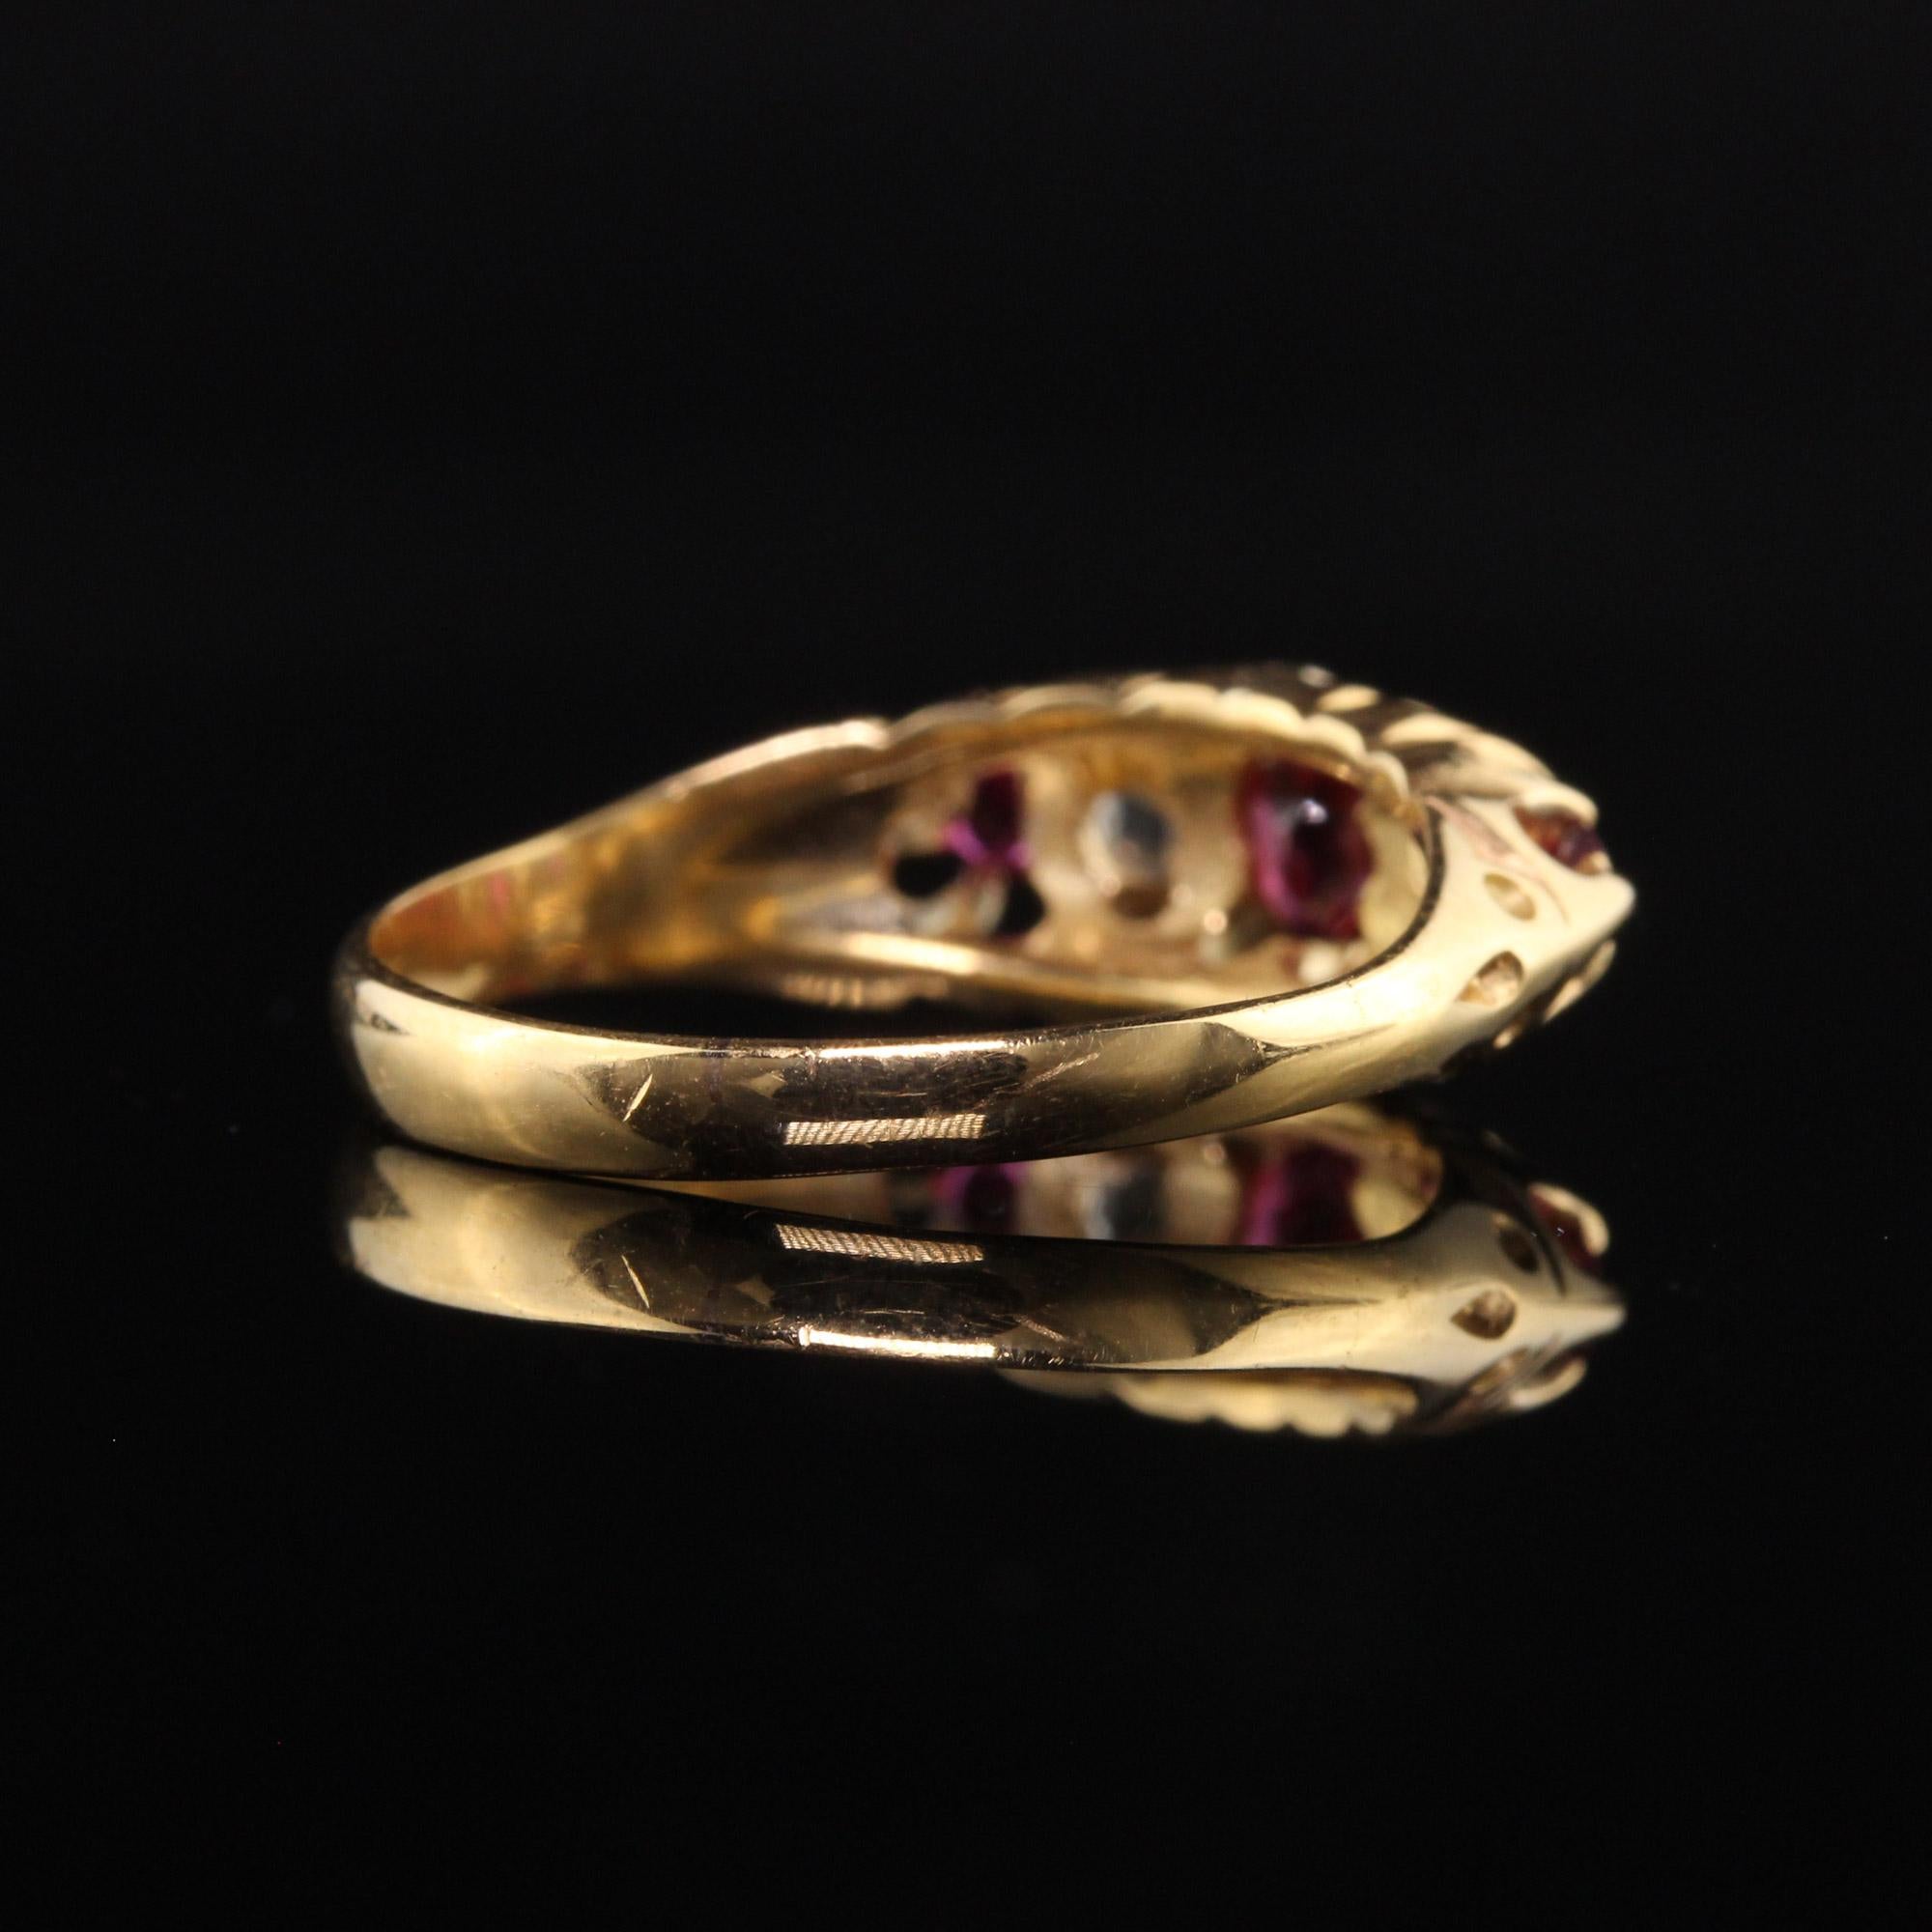 Women's Antique Victorian English 18K Yellow Gold Rose Cut Diamond and Ruby Ring